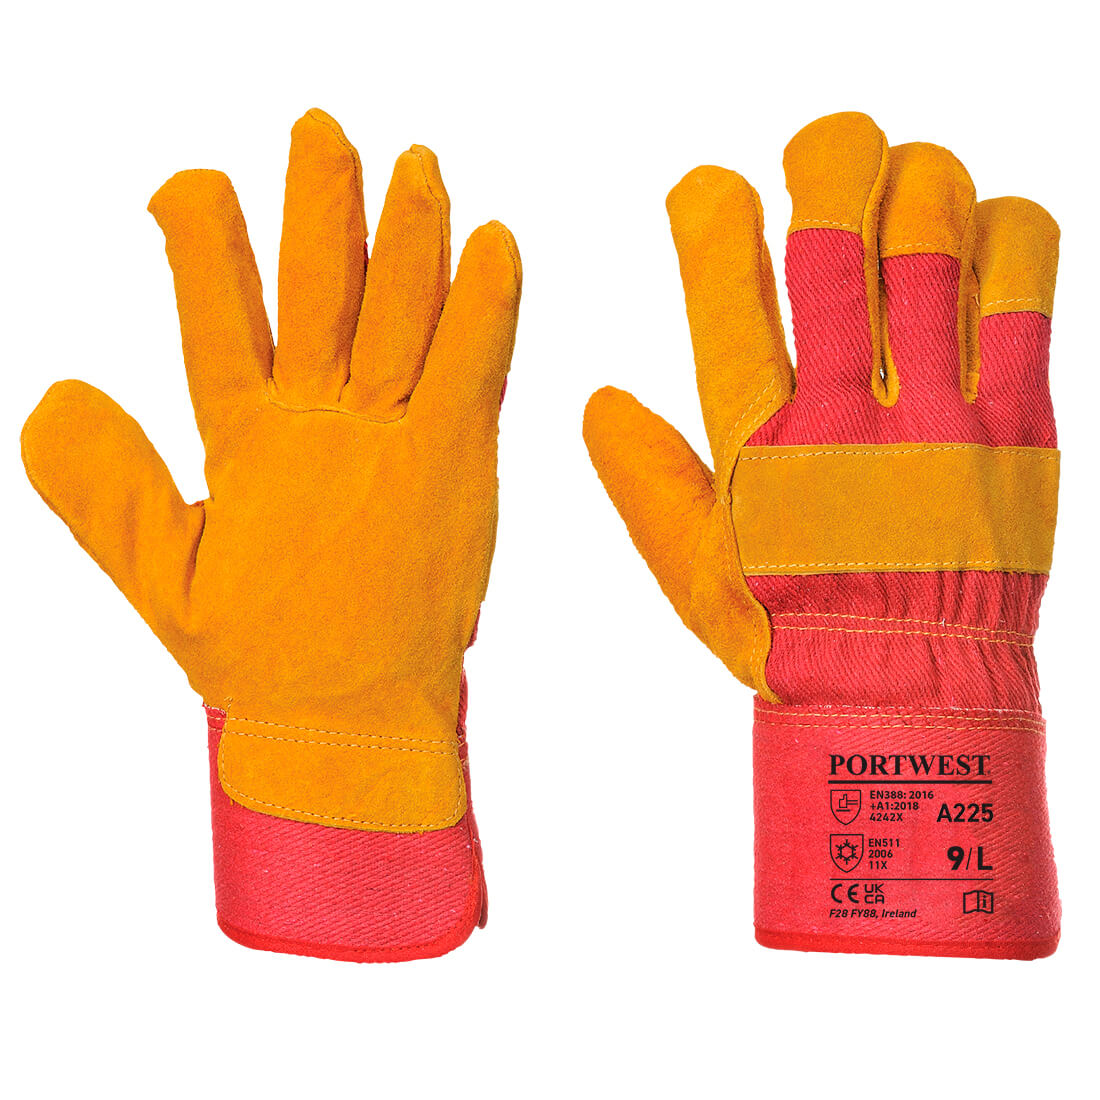 Fleece Lined Rigger Glove - Red